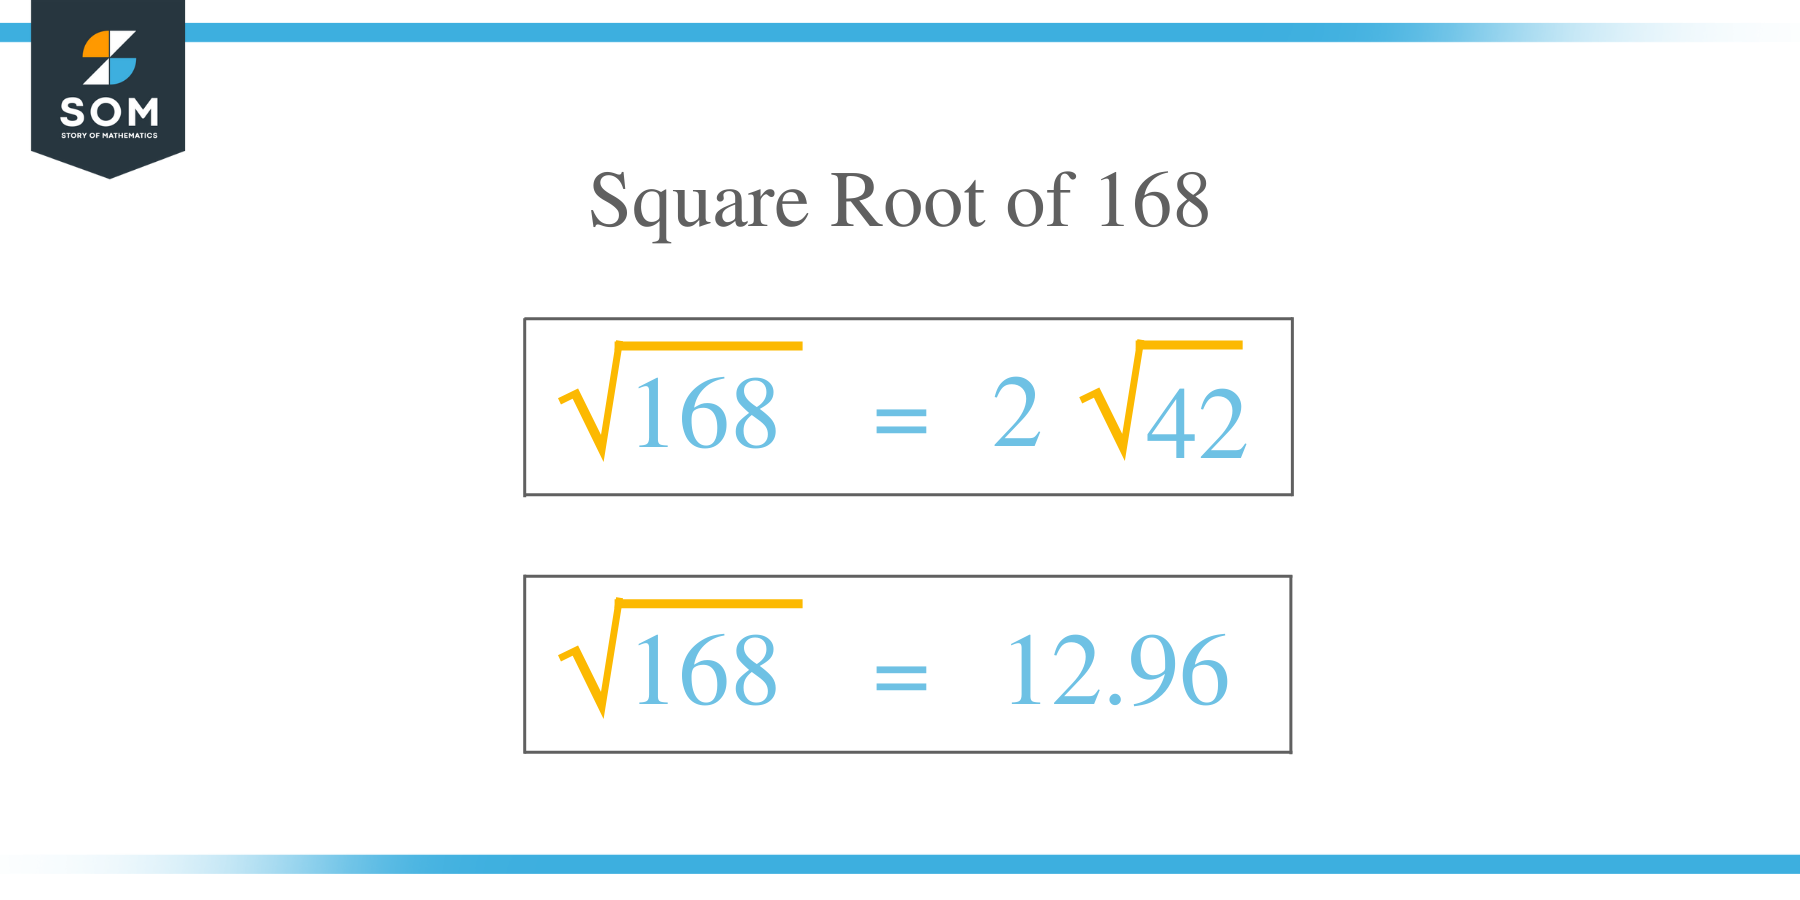 Square Root of 168